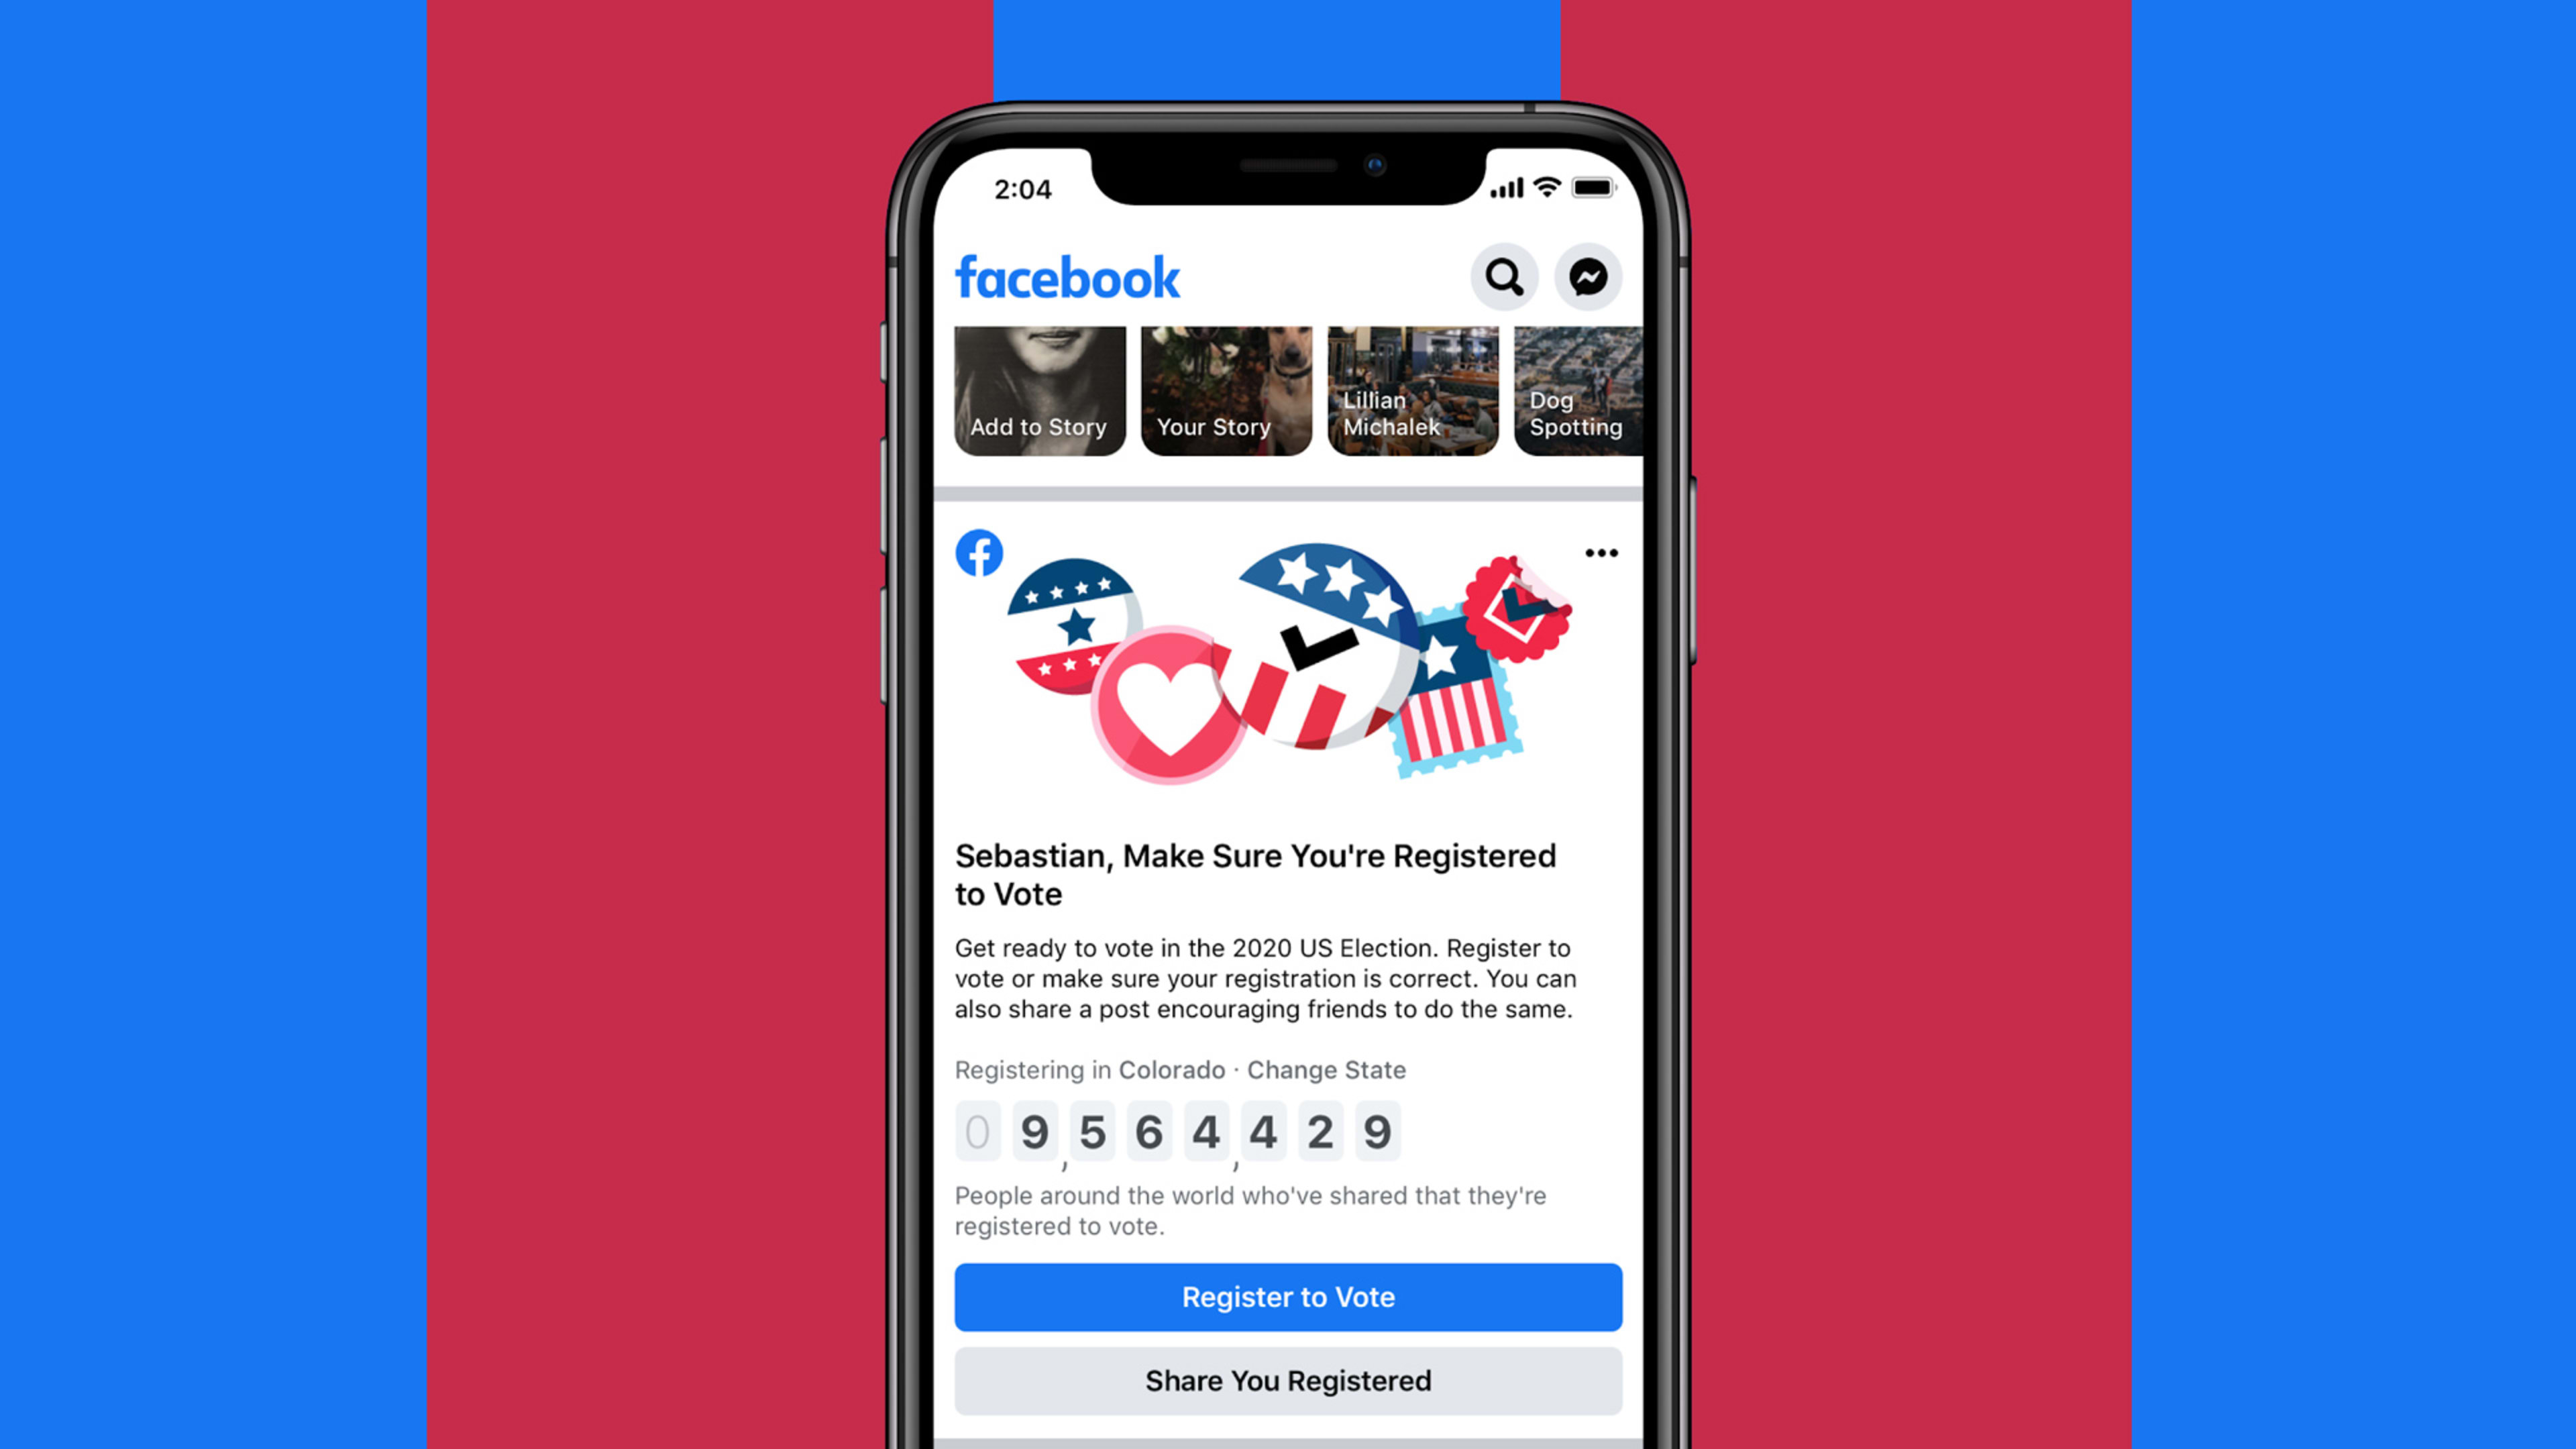 What’s troubling about Facebook’s plan to sign up 4 million voters